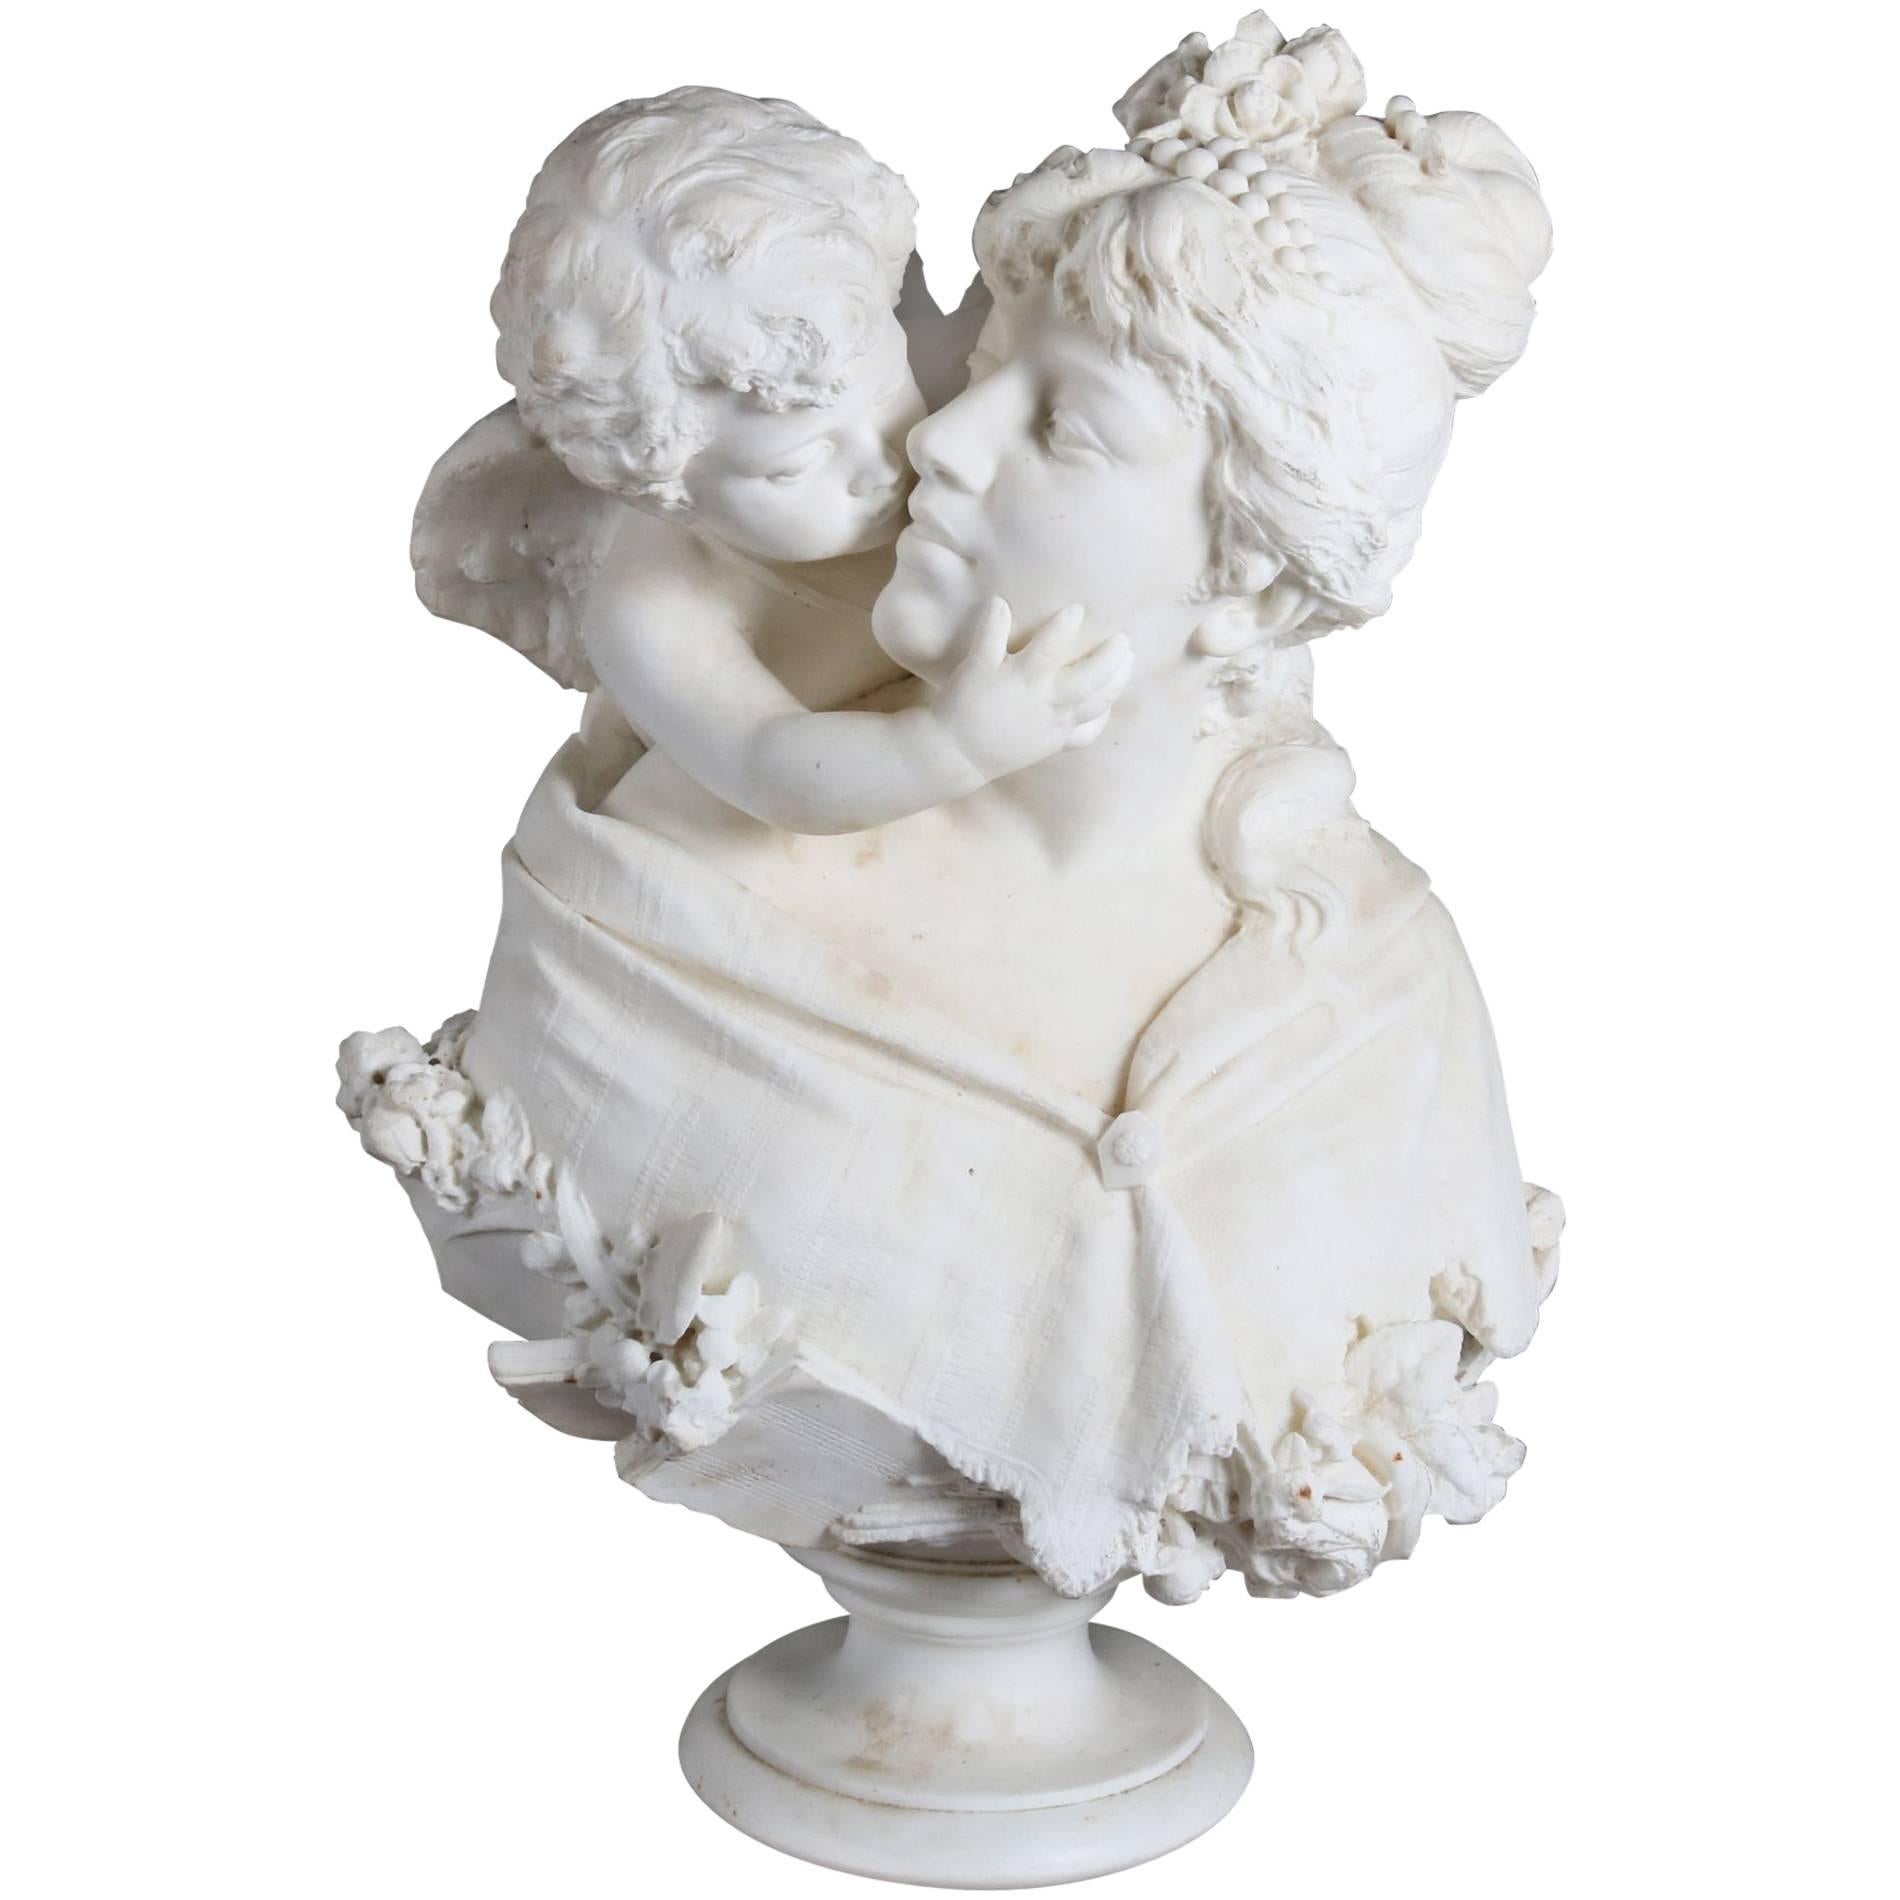 Oversized Antique Carved Alabaster Bust of Classical Cupid & Psyche